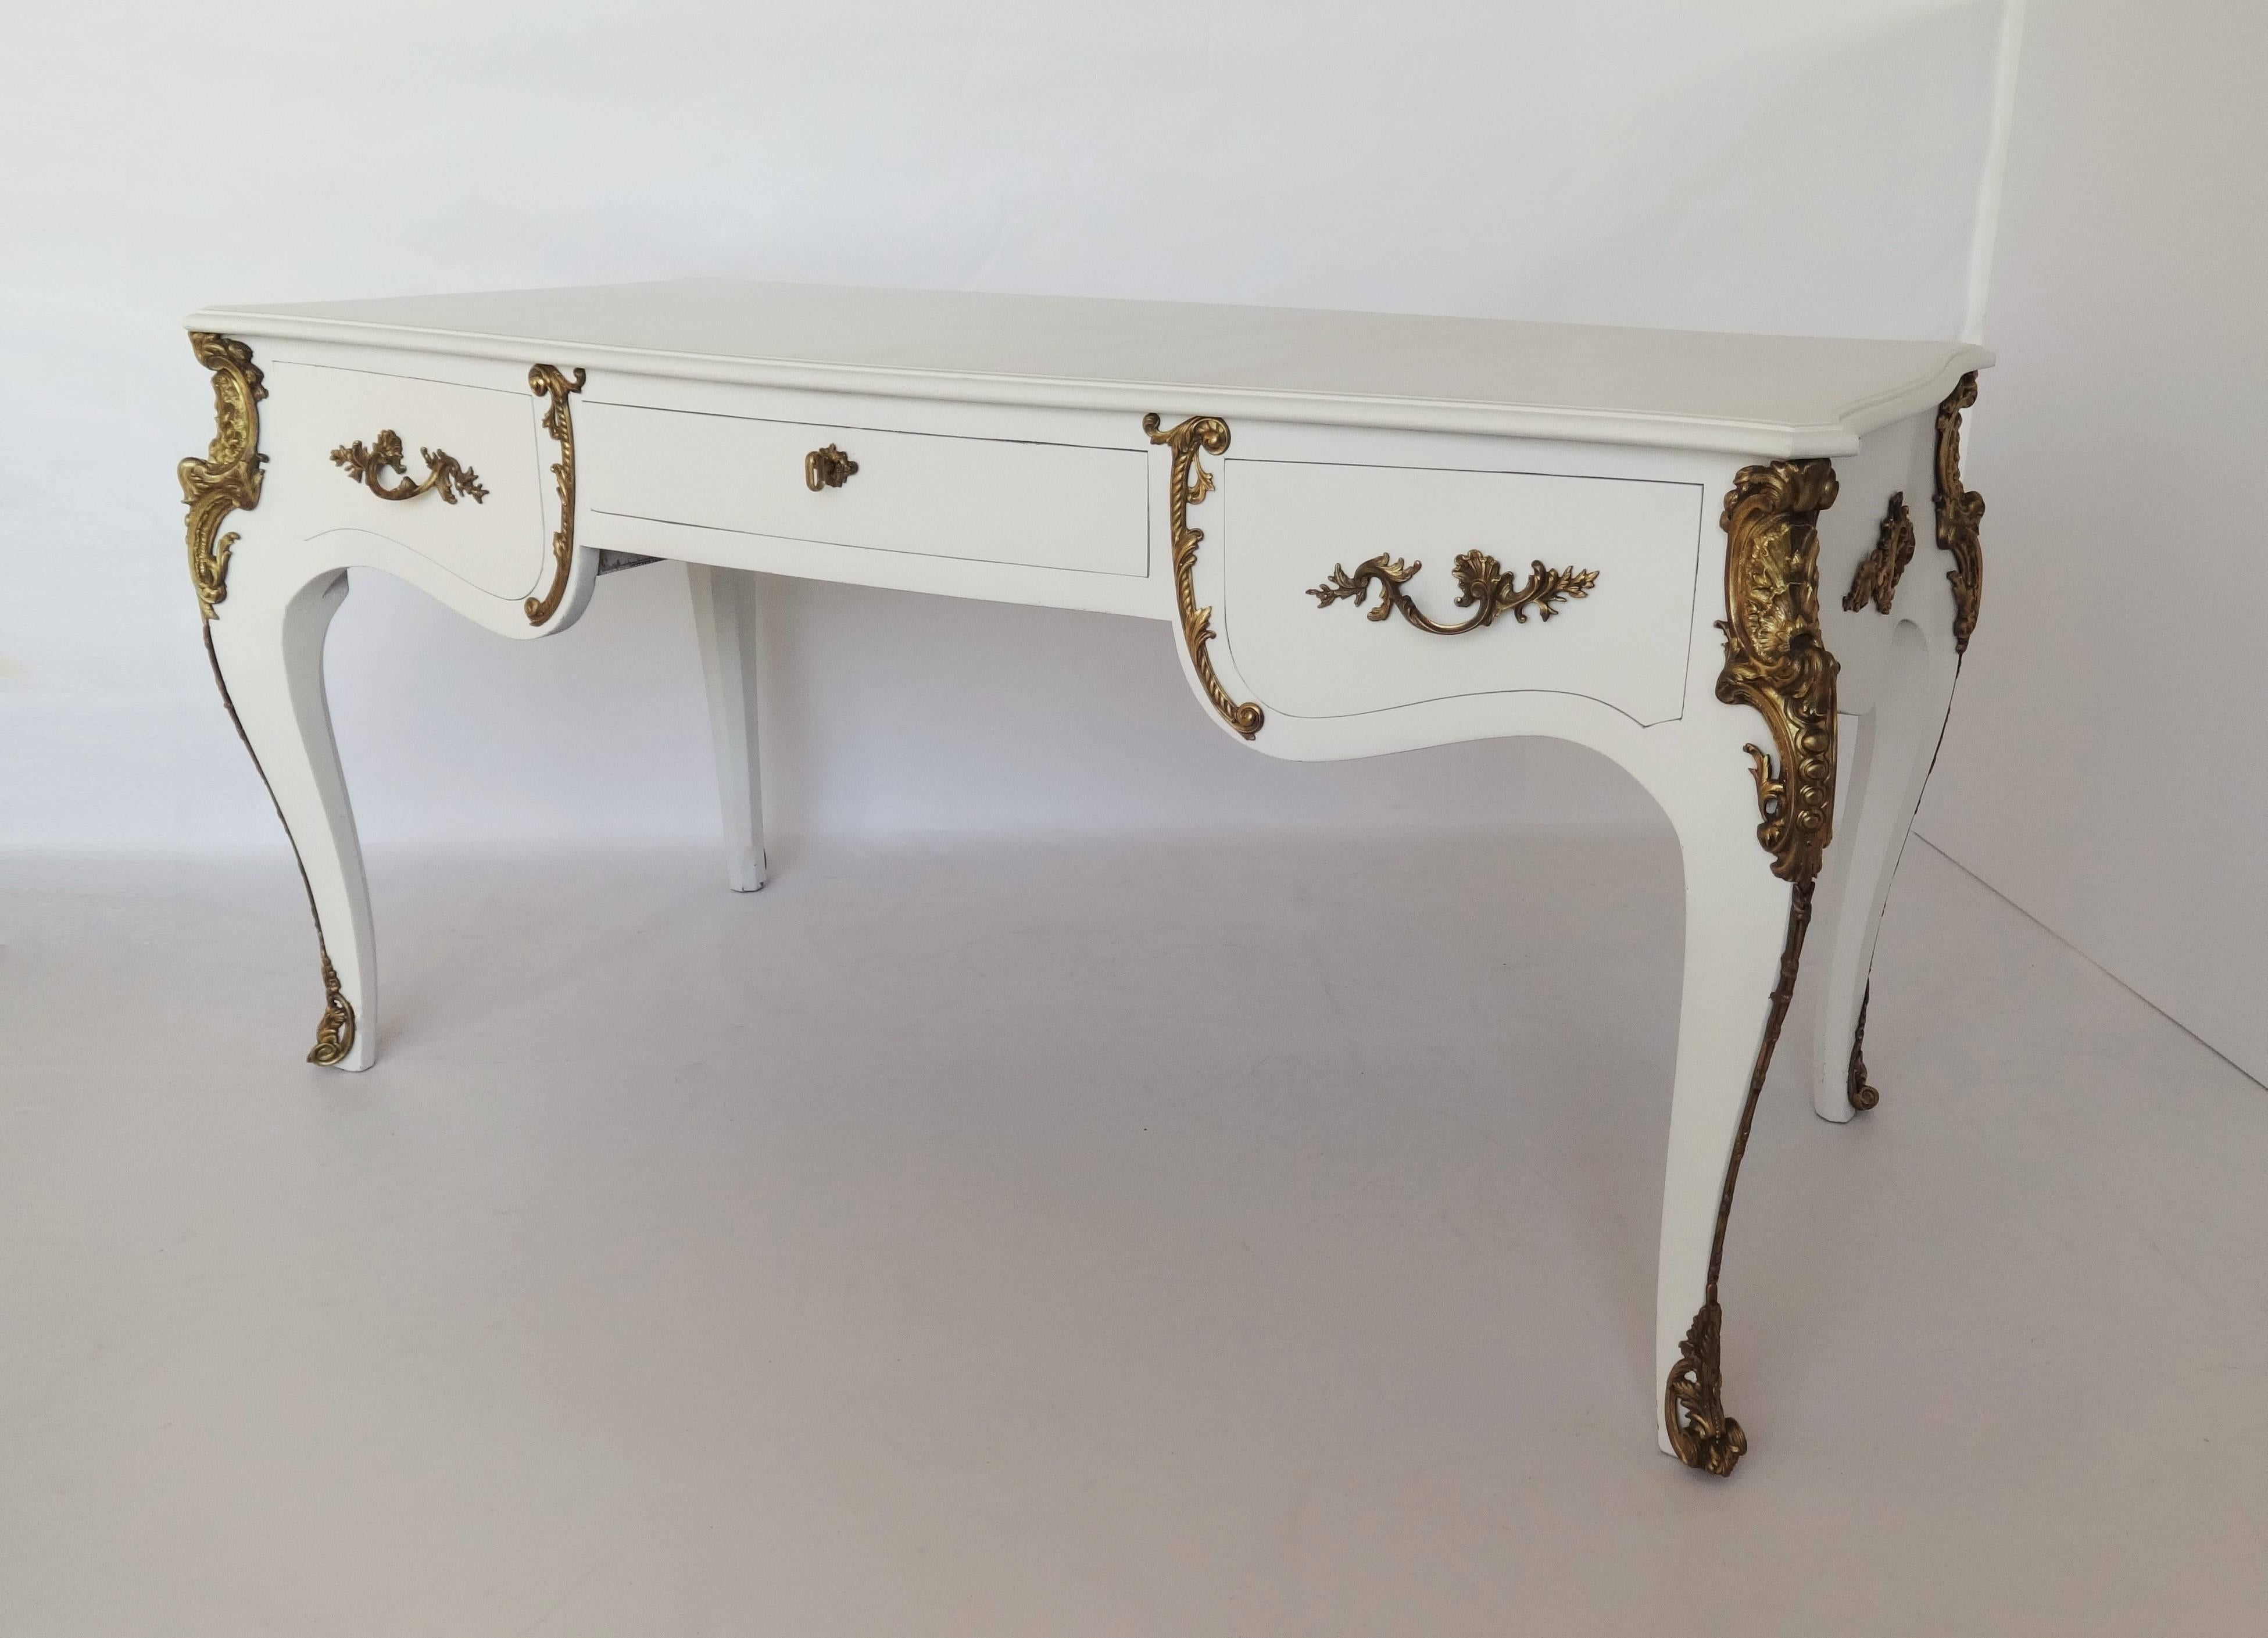 Fine, French produced Louis XV style bureau plat, gilt embossed with lacquered frame. With original key. Fine rocaille motif moulded mounts throughout, one side with three, deep space pull-out drawers, and the reverse with an identical facade to